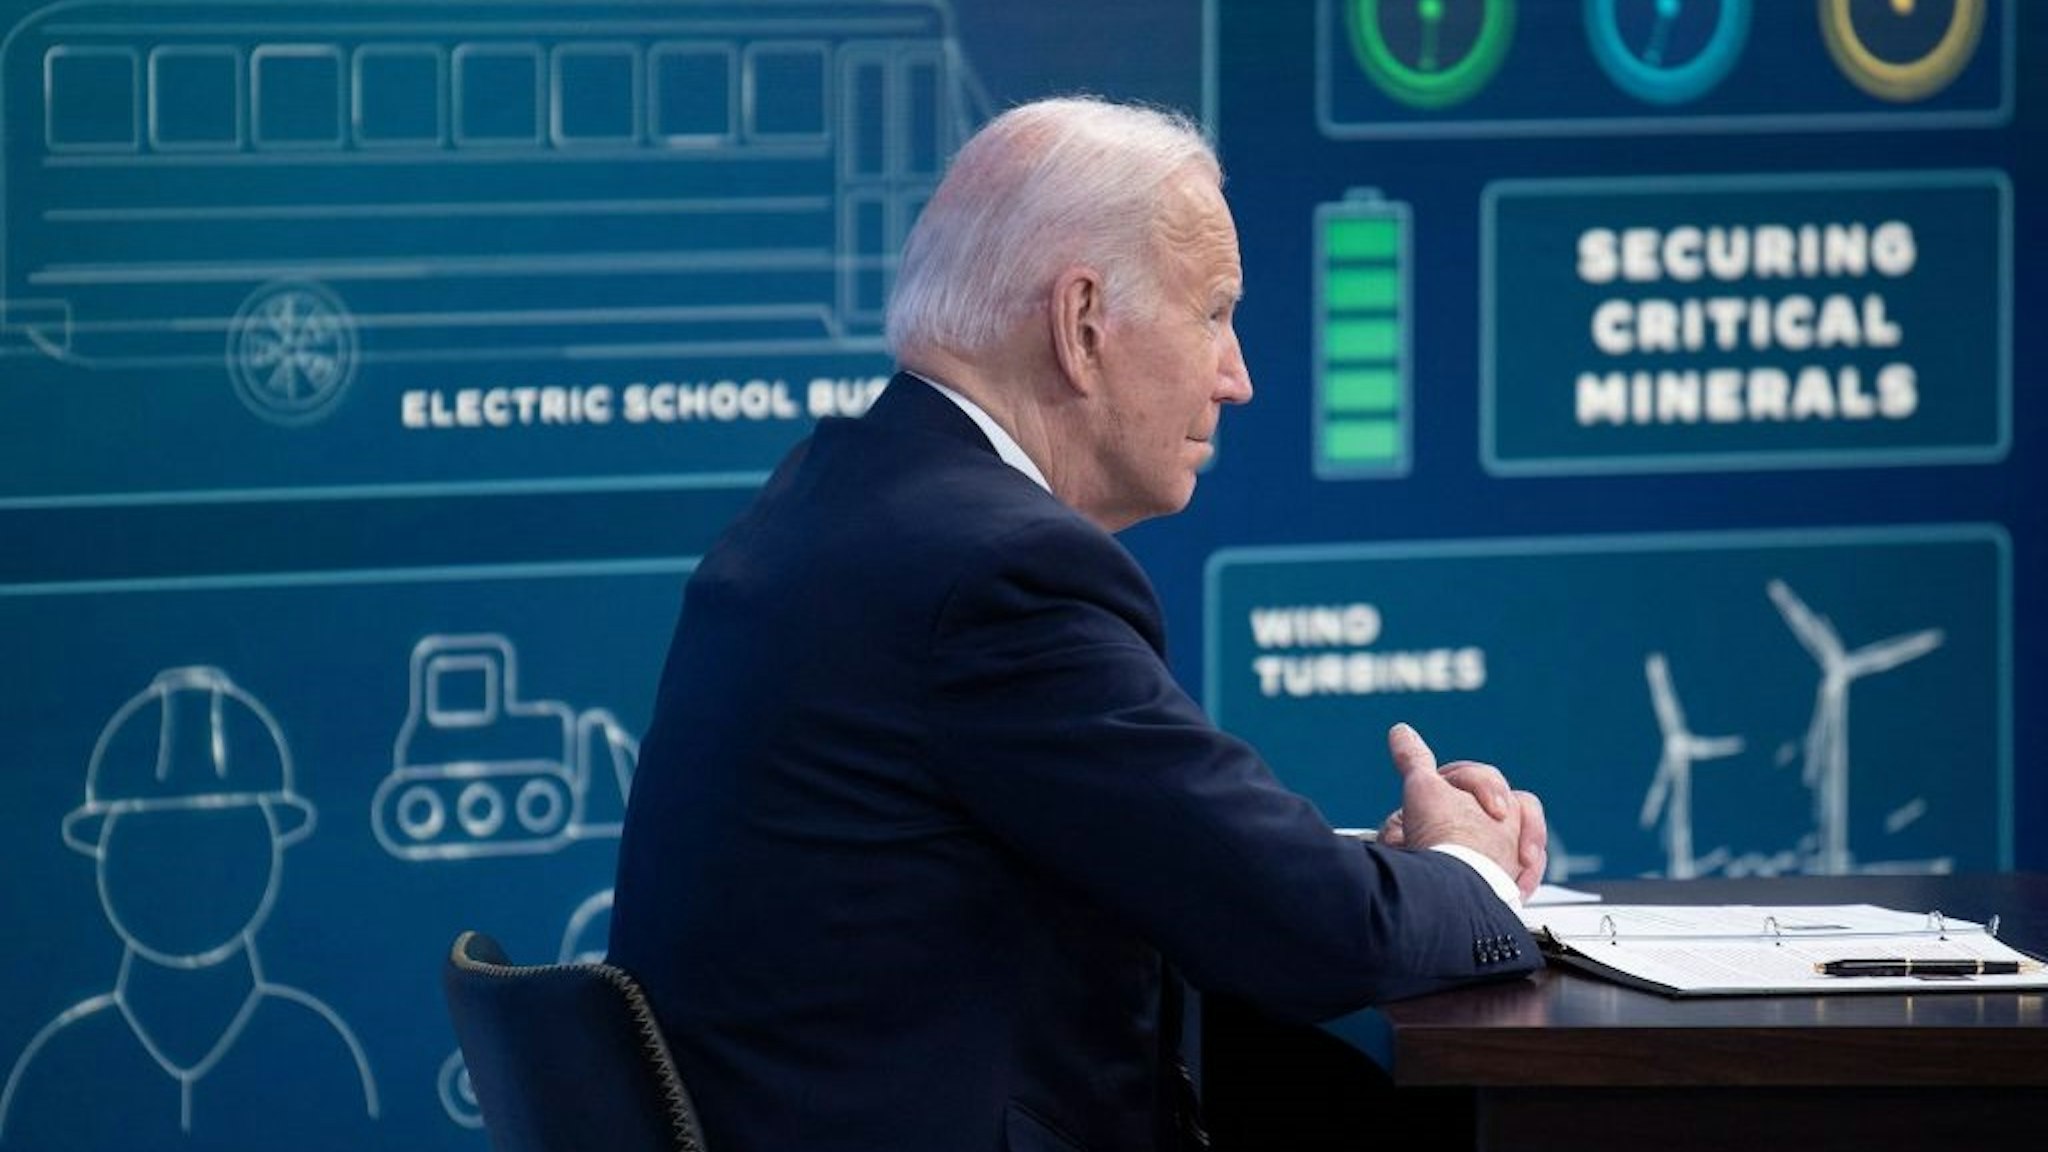 US President Joe Biden speaks during a virtual meeting on securing critical mineral supply chains in the South Court Auditorium near the White House in Washington, DC, on February 22, 2022.